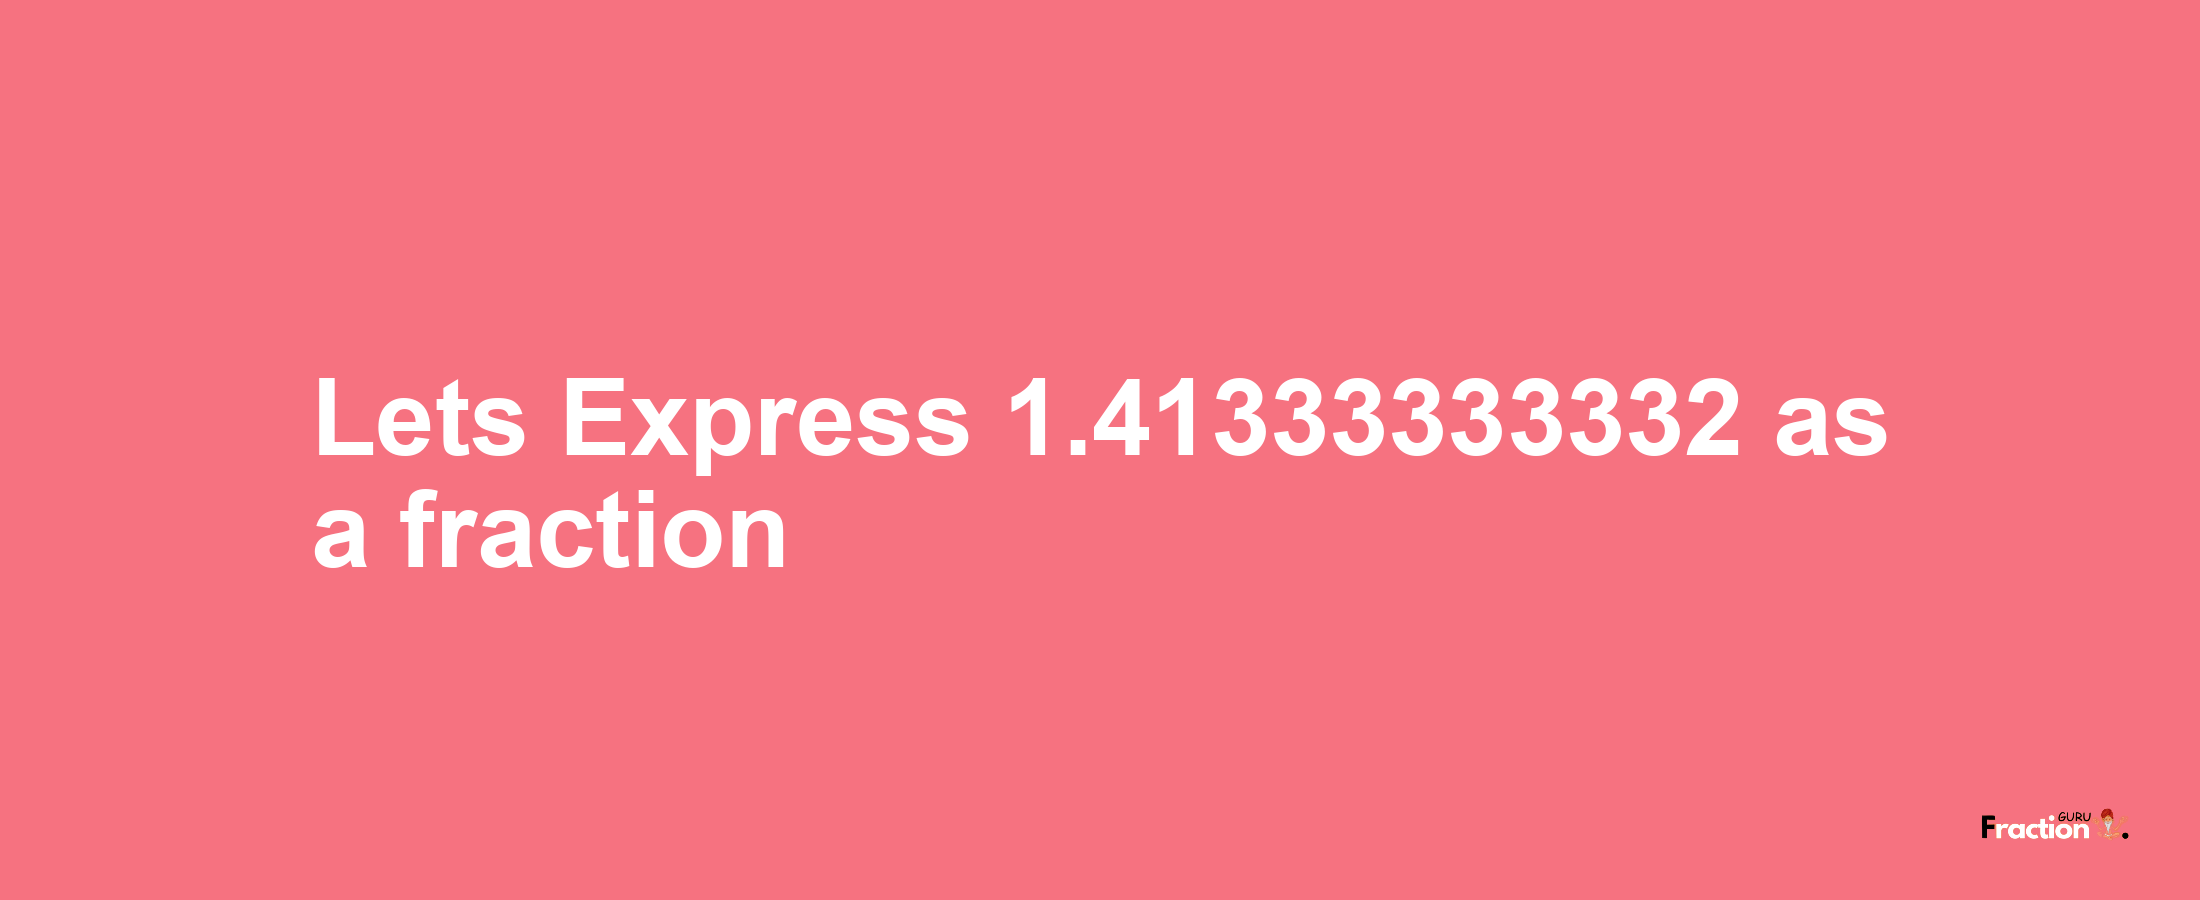 Lets Express 1.41333333332 as afraction